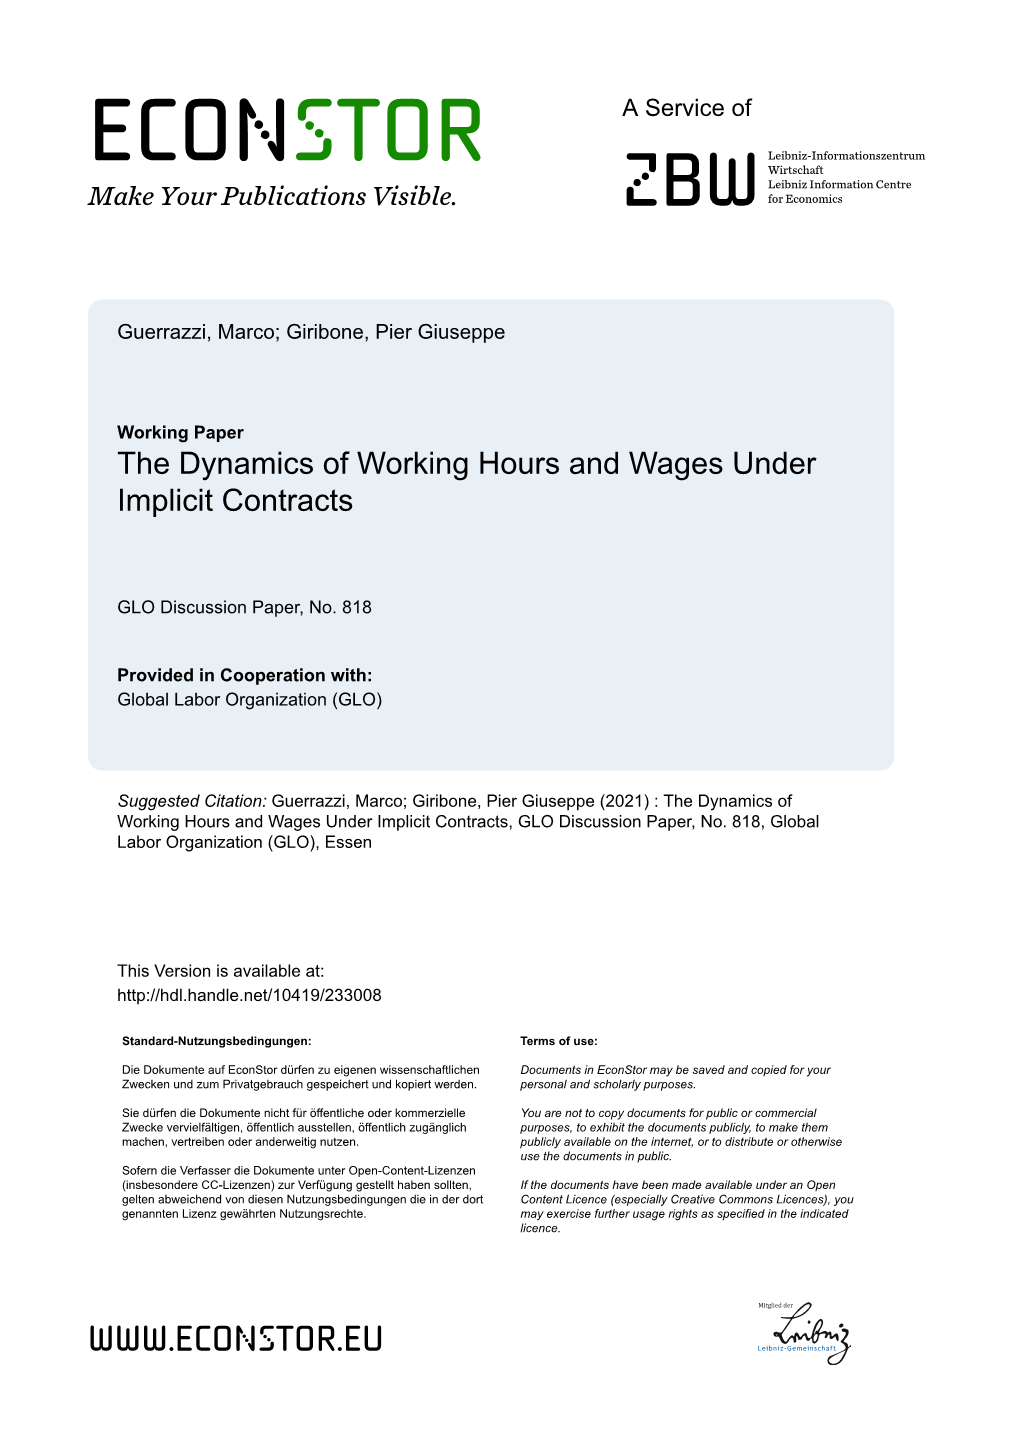 The Dynamics of Working Hours and Wages Under Implicit Contracts